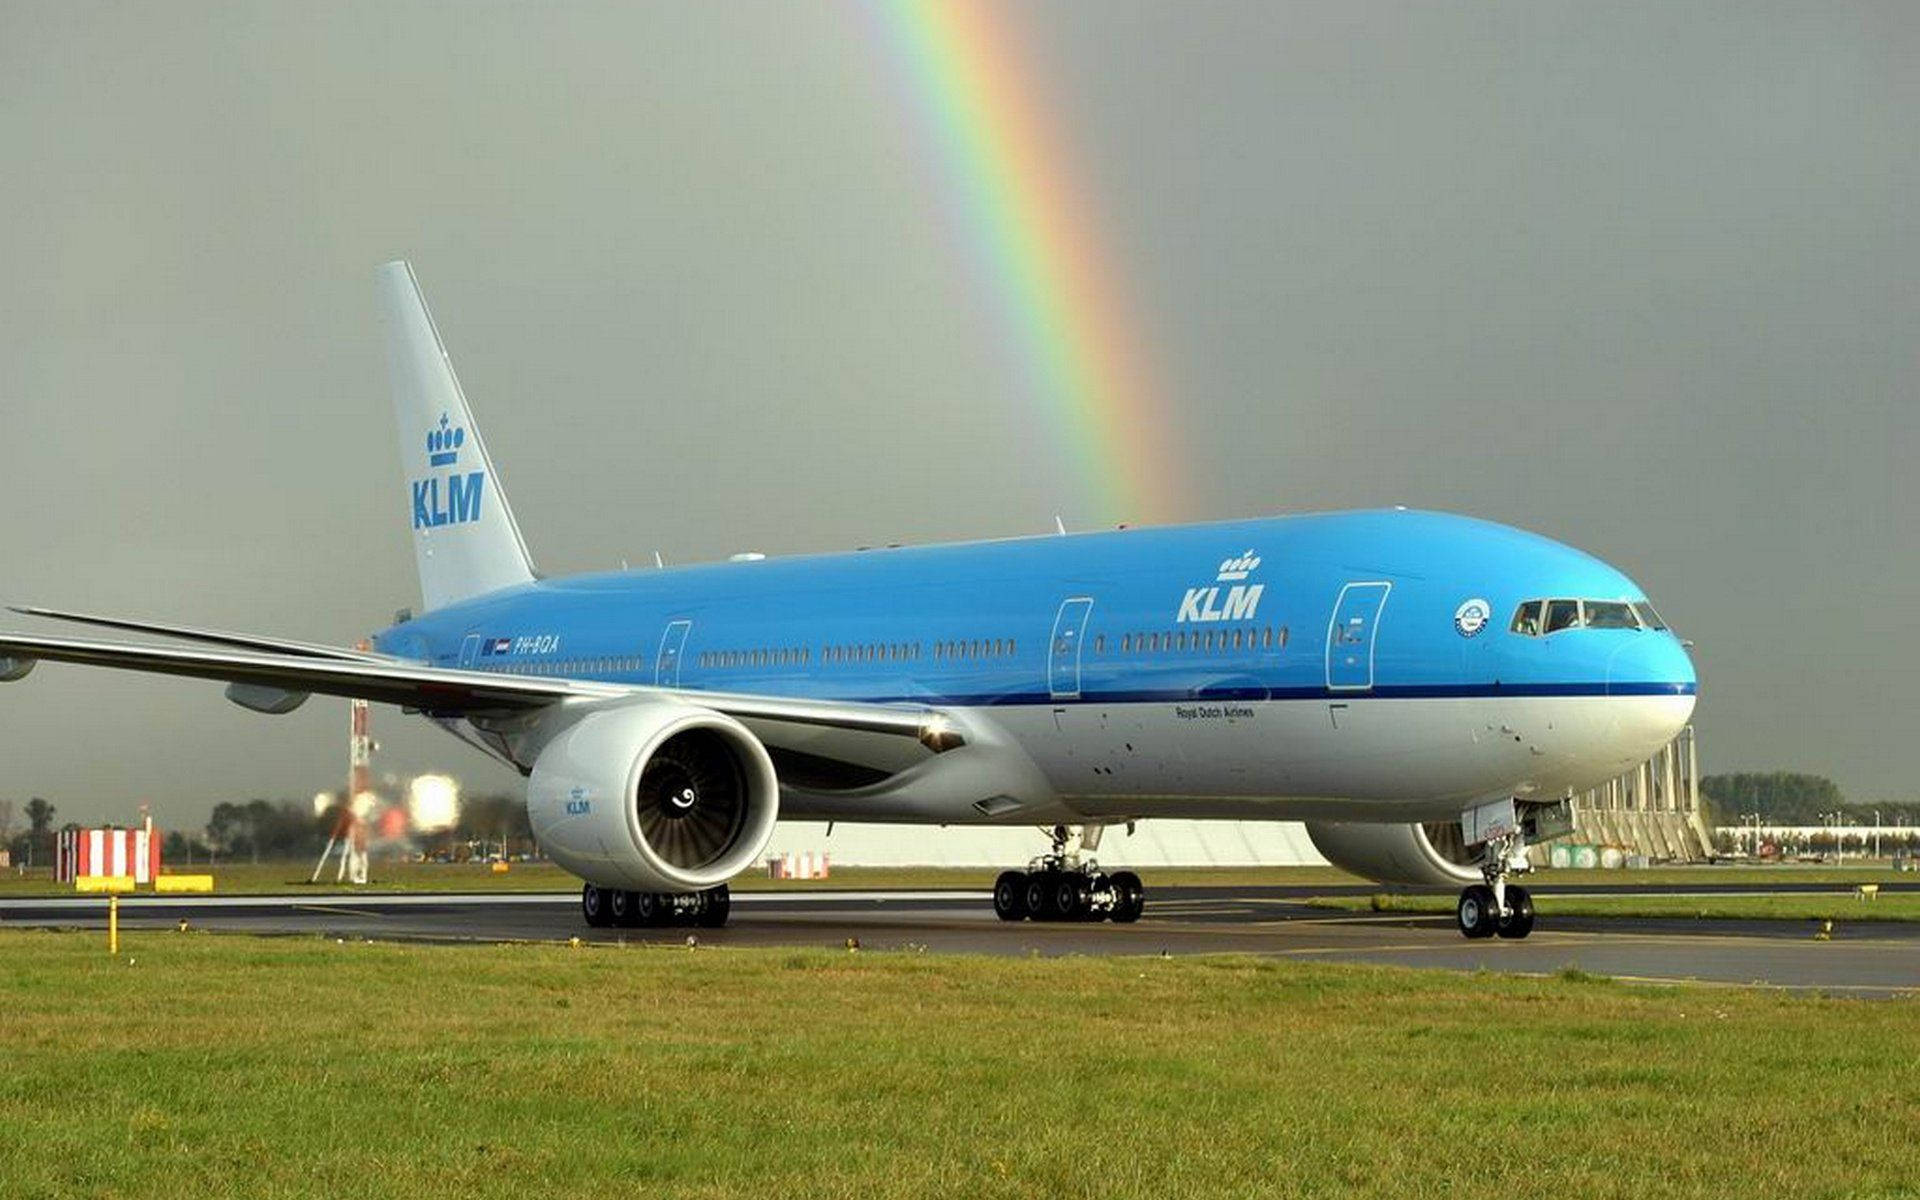 Delightful Rainbow With Klm Aircraft Wallpaper